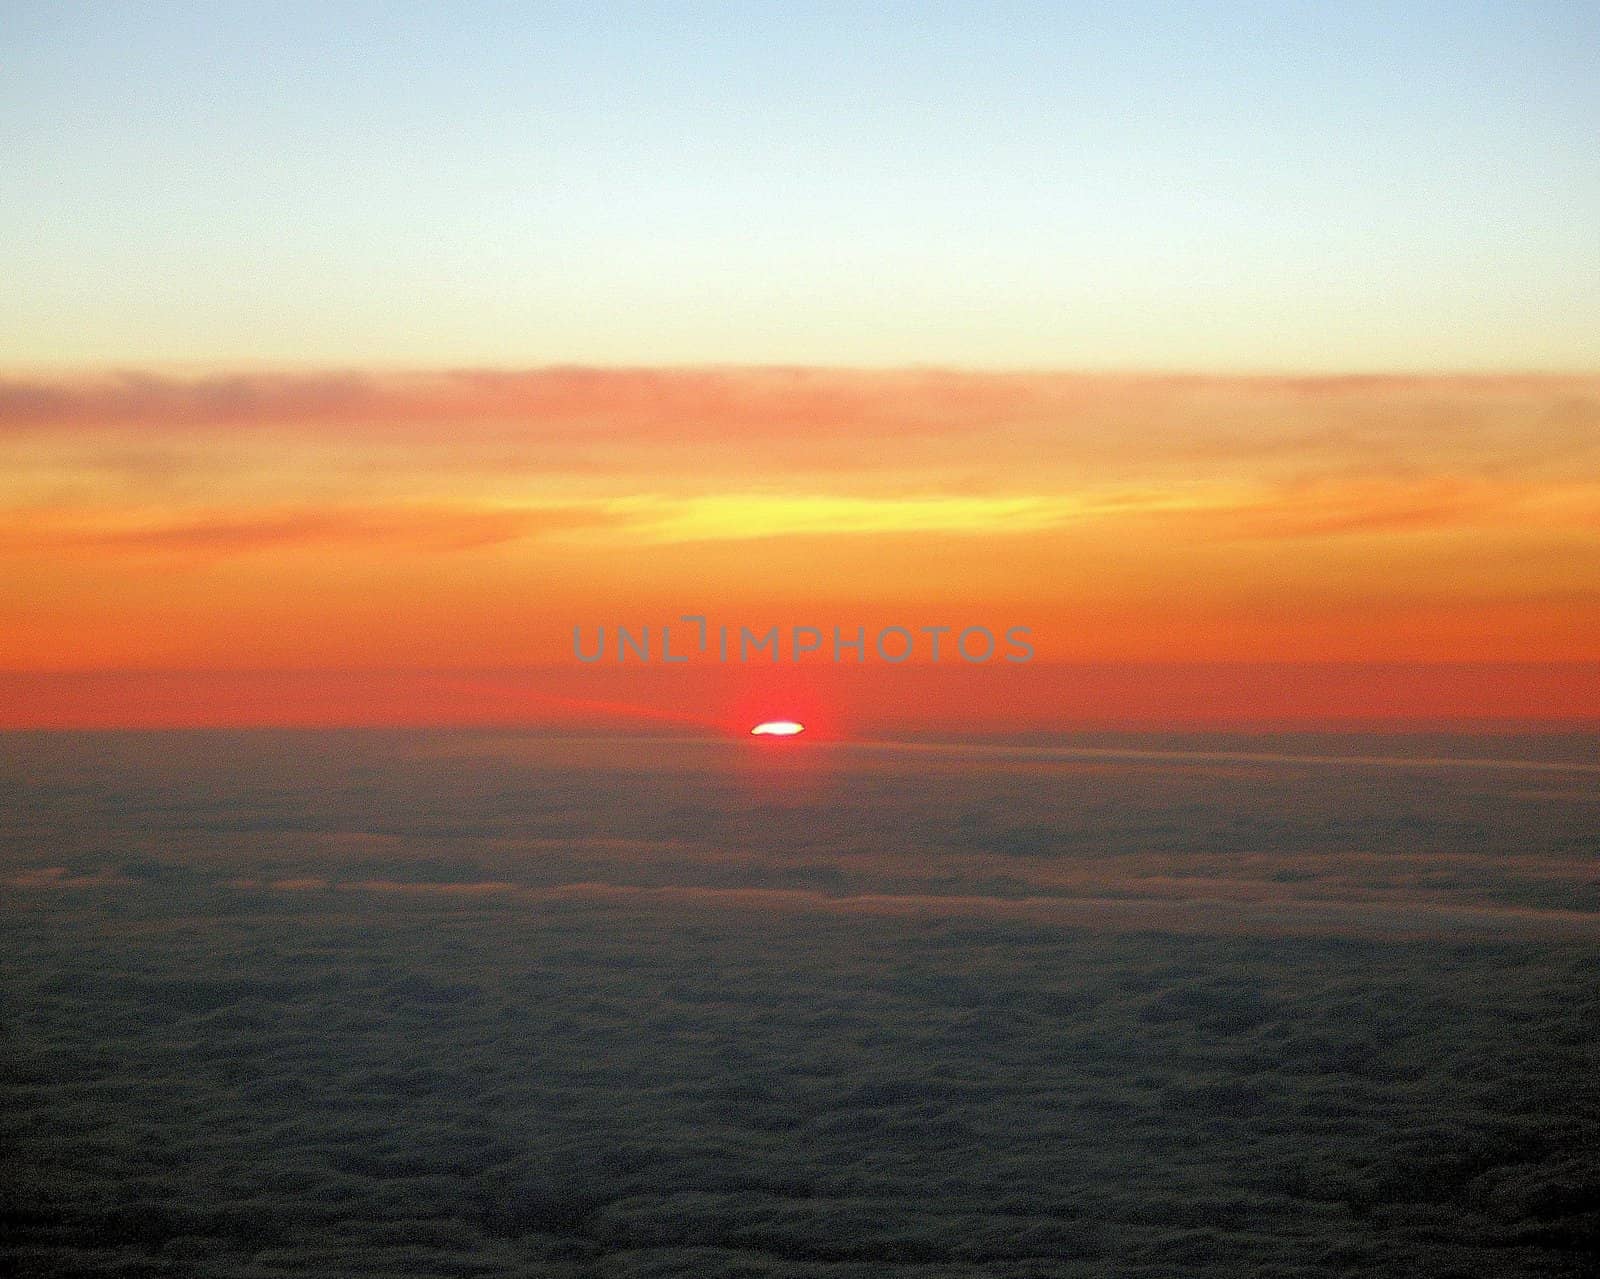 The view from an aeroplane of the sunset.